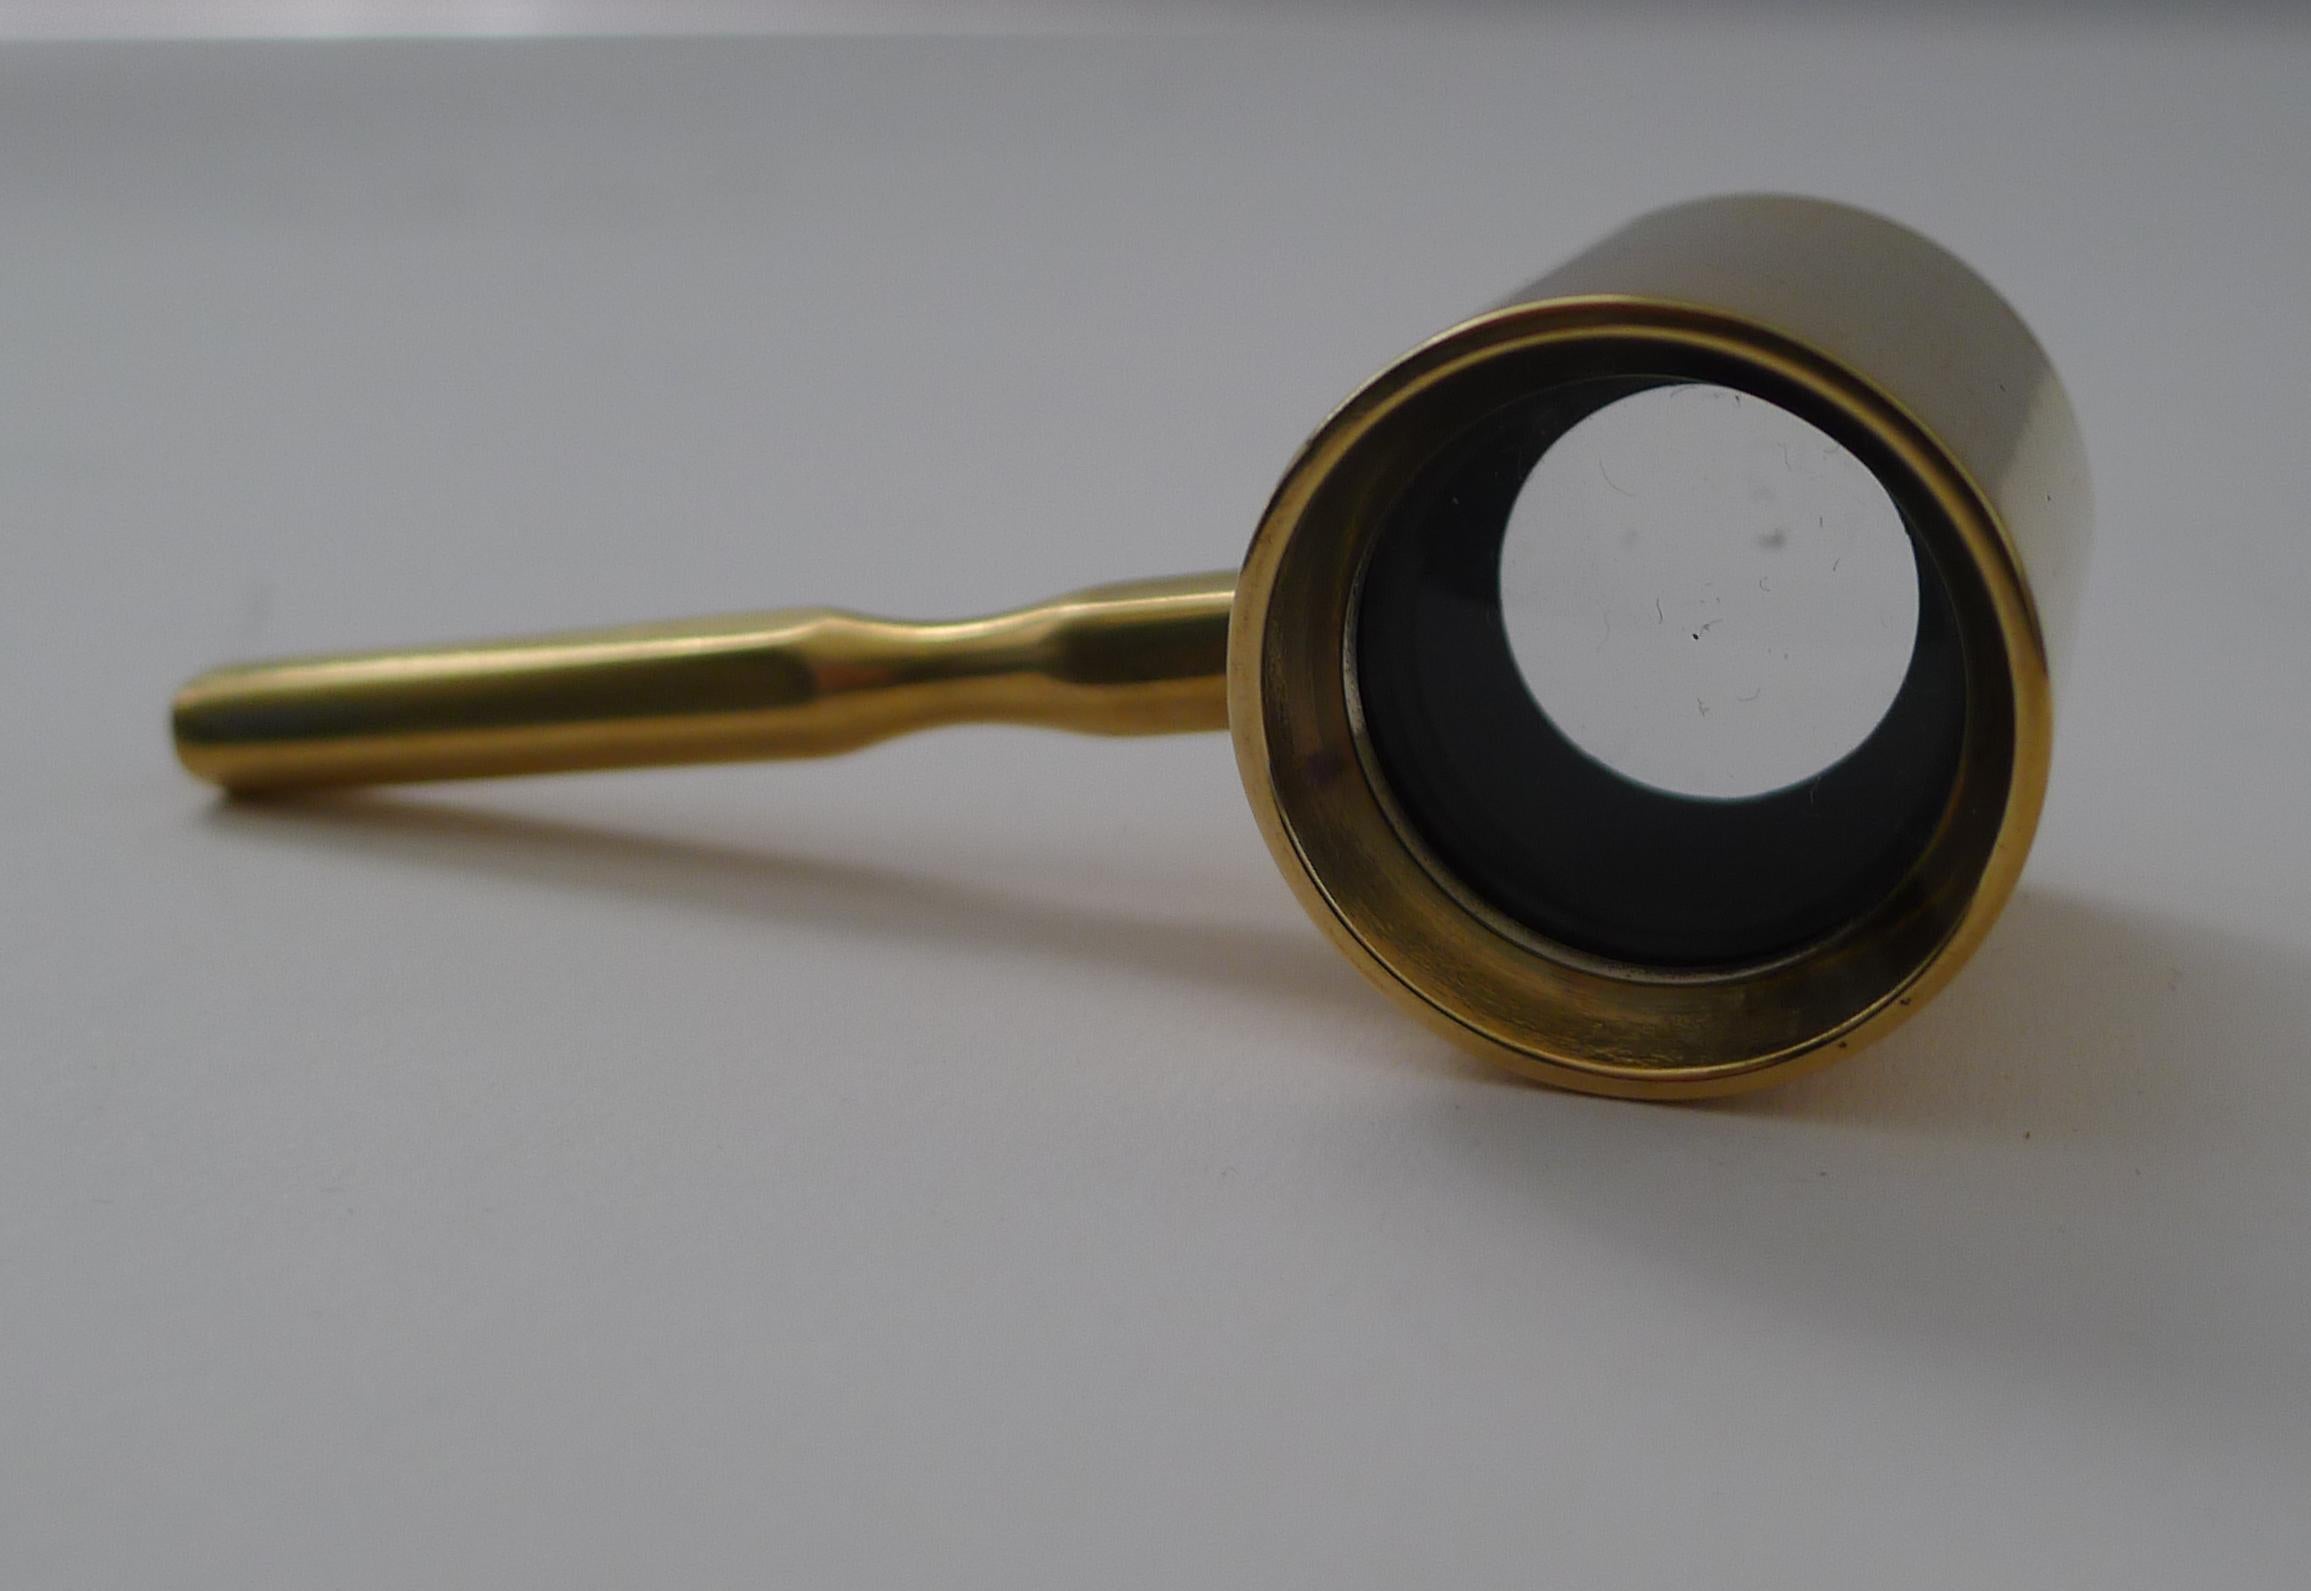 An unusual late nineteenth century Coddington magnifying glass made from English brass having been professionally polished.

Excellent condition measuring 3